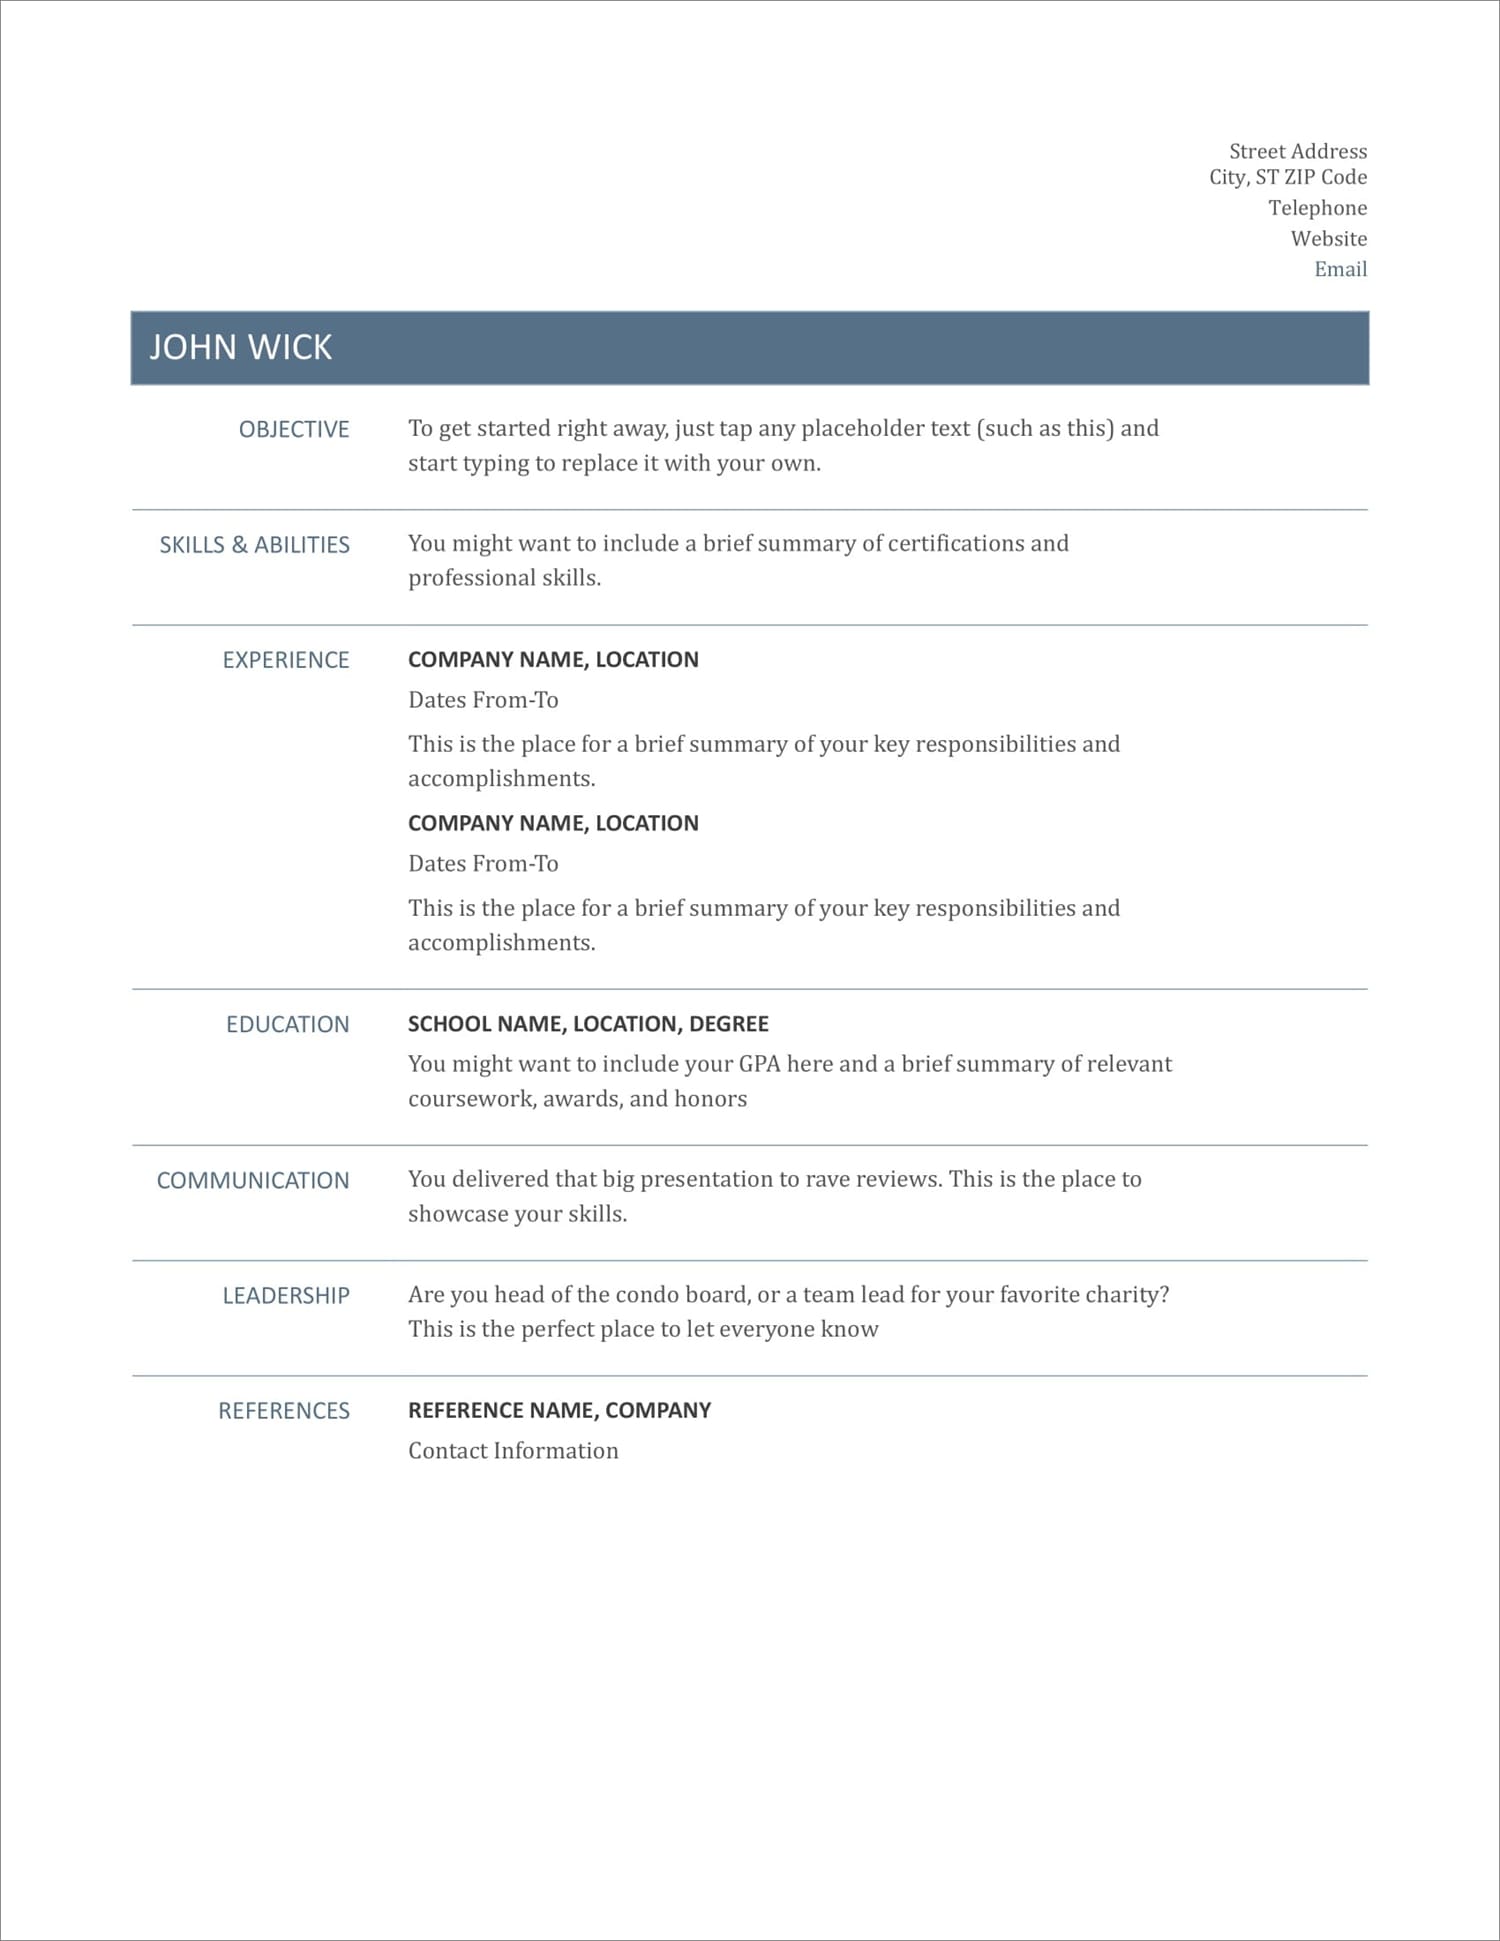 17 Free Resume Templates For 2021 To Download Now